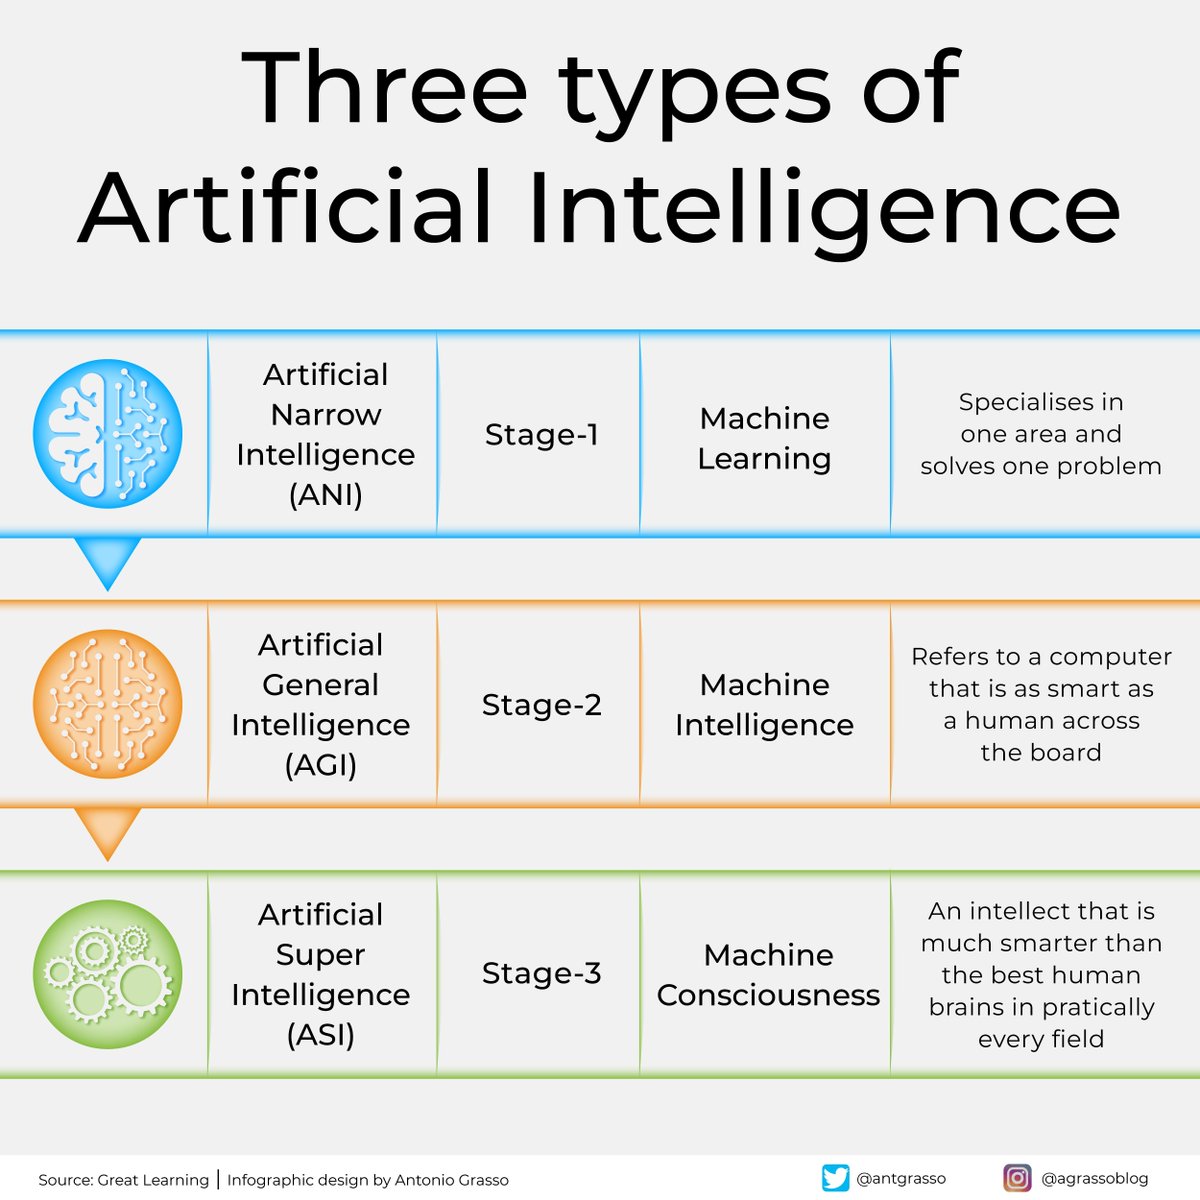 In artificial intelligence, we explore different levels of machine intellect. -Artificial Narrow Intelligence (ANI) The one we use today -Artificial General Intelligence (AGI) Still hypothetical -Artificial Super Intelligence (ASI) Still very theoretical Microblog @antgrasso